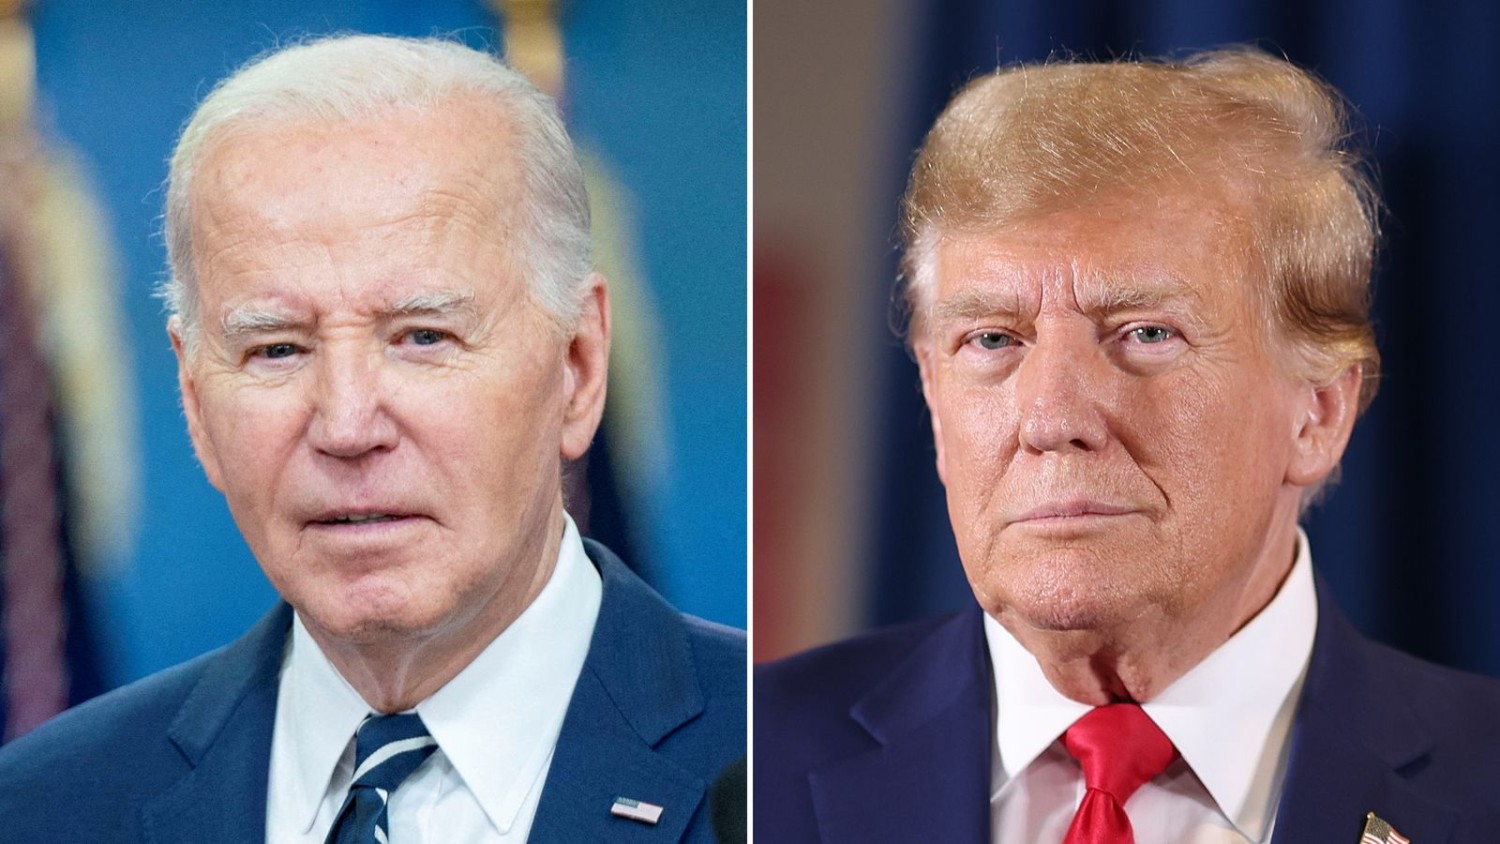 Biden and Trump agree to 2 presidential debates, with first set for June 27 on CNN